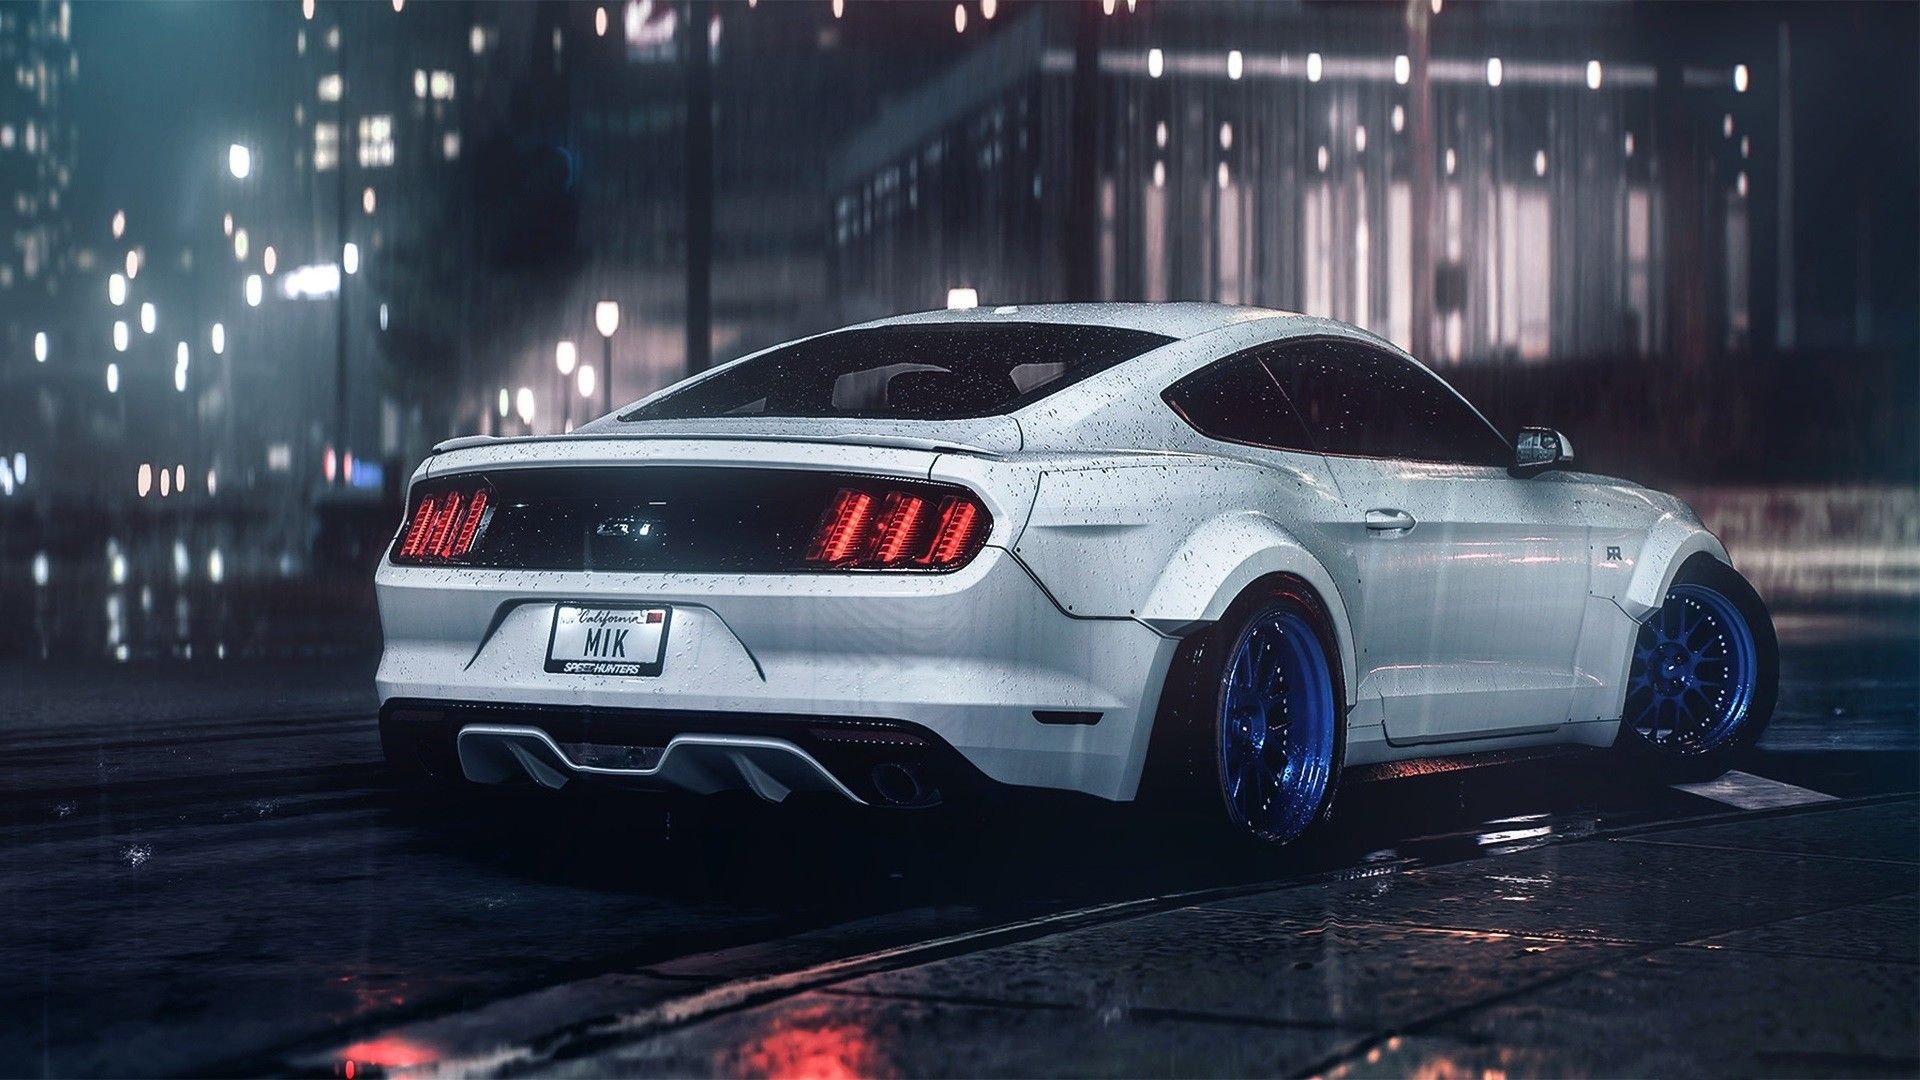 HD wallpaper Ford Ford Mustang Widebody Ford Mustang Widebody   Wallpaper Flare